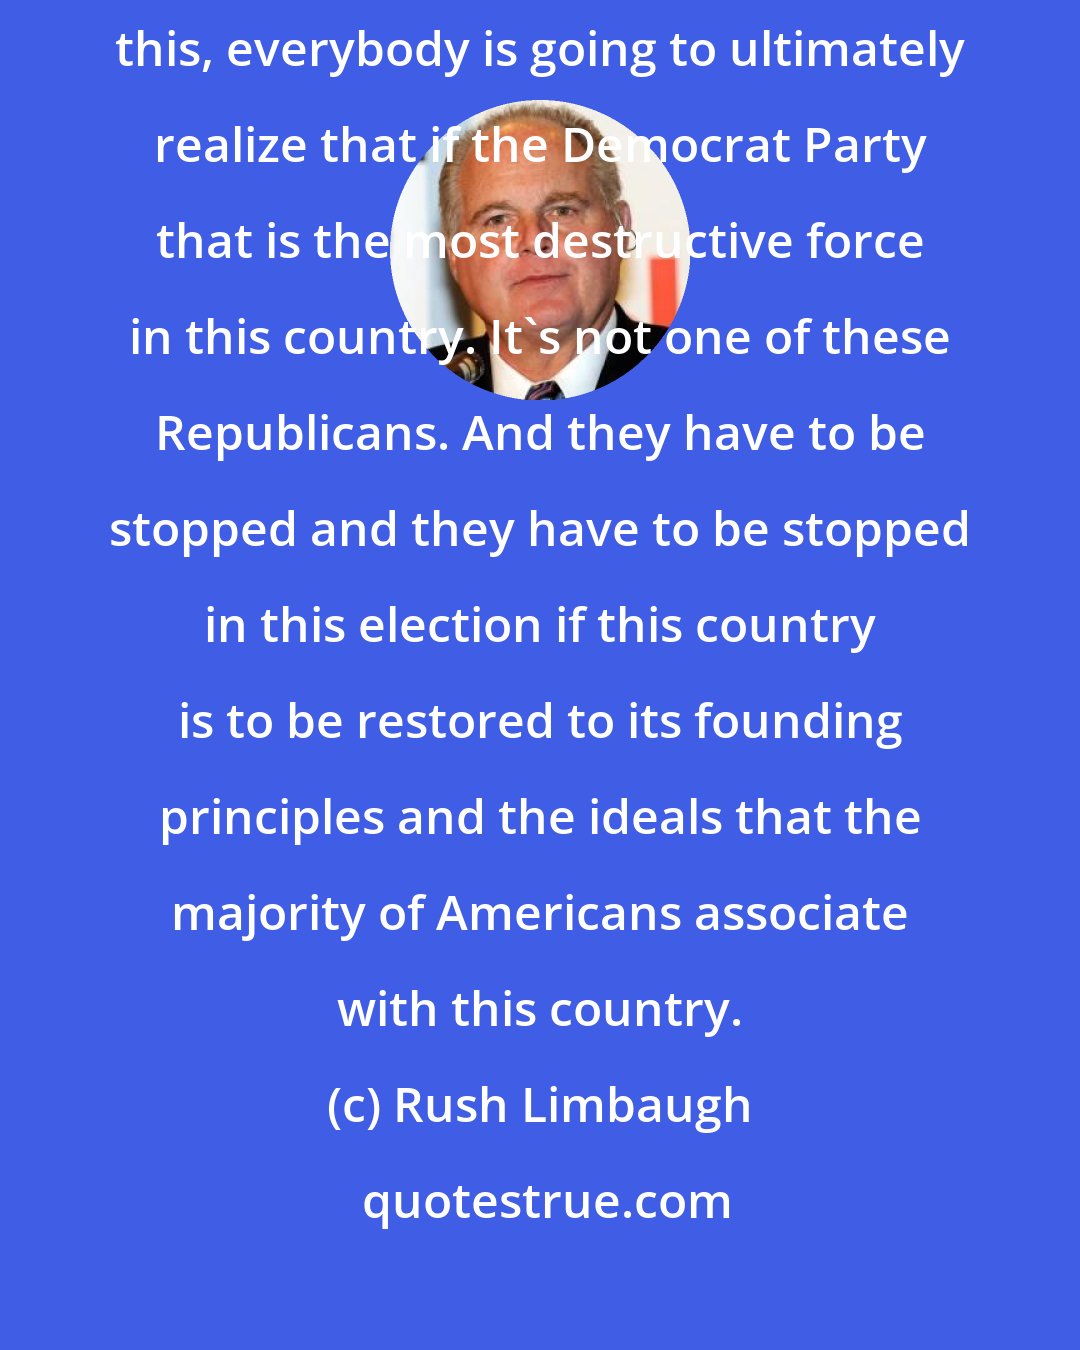 Rush Limbaugh: I think we're going to move forward because I think at the end of all of this, everybody is going to ultimately realize that if the Democrat Party that is the most destructive force in this country. It's not one of these Republicans. And they have to be stopped and they have to be stopped in this election if this country is to be restored to its founding principles and the ideals that the majority of Americans associate with this country.